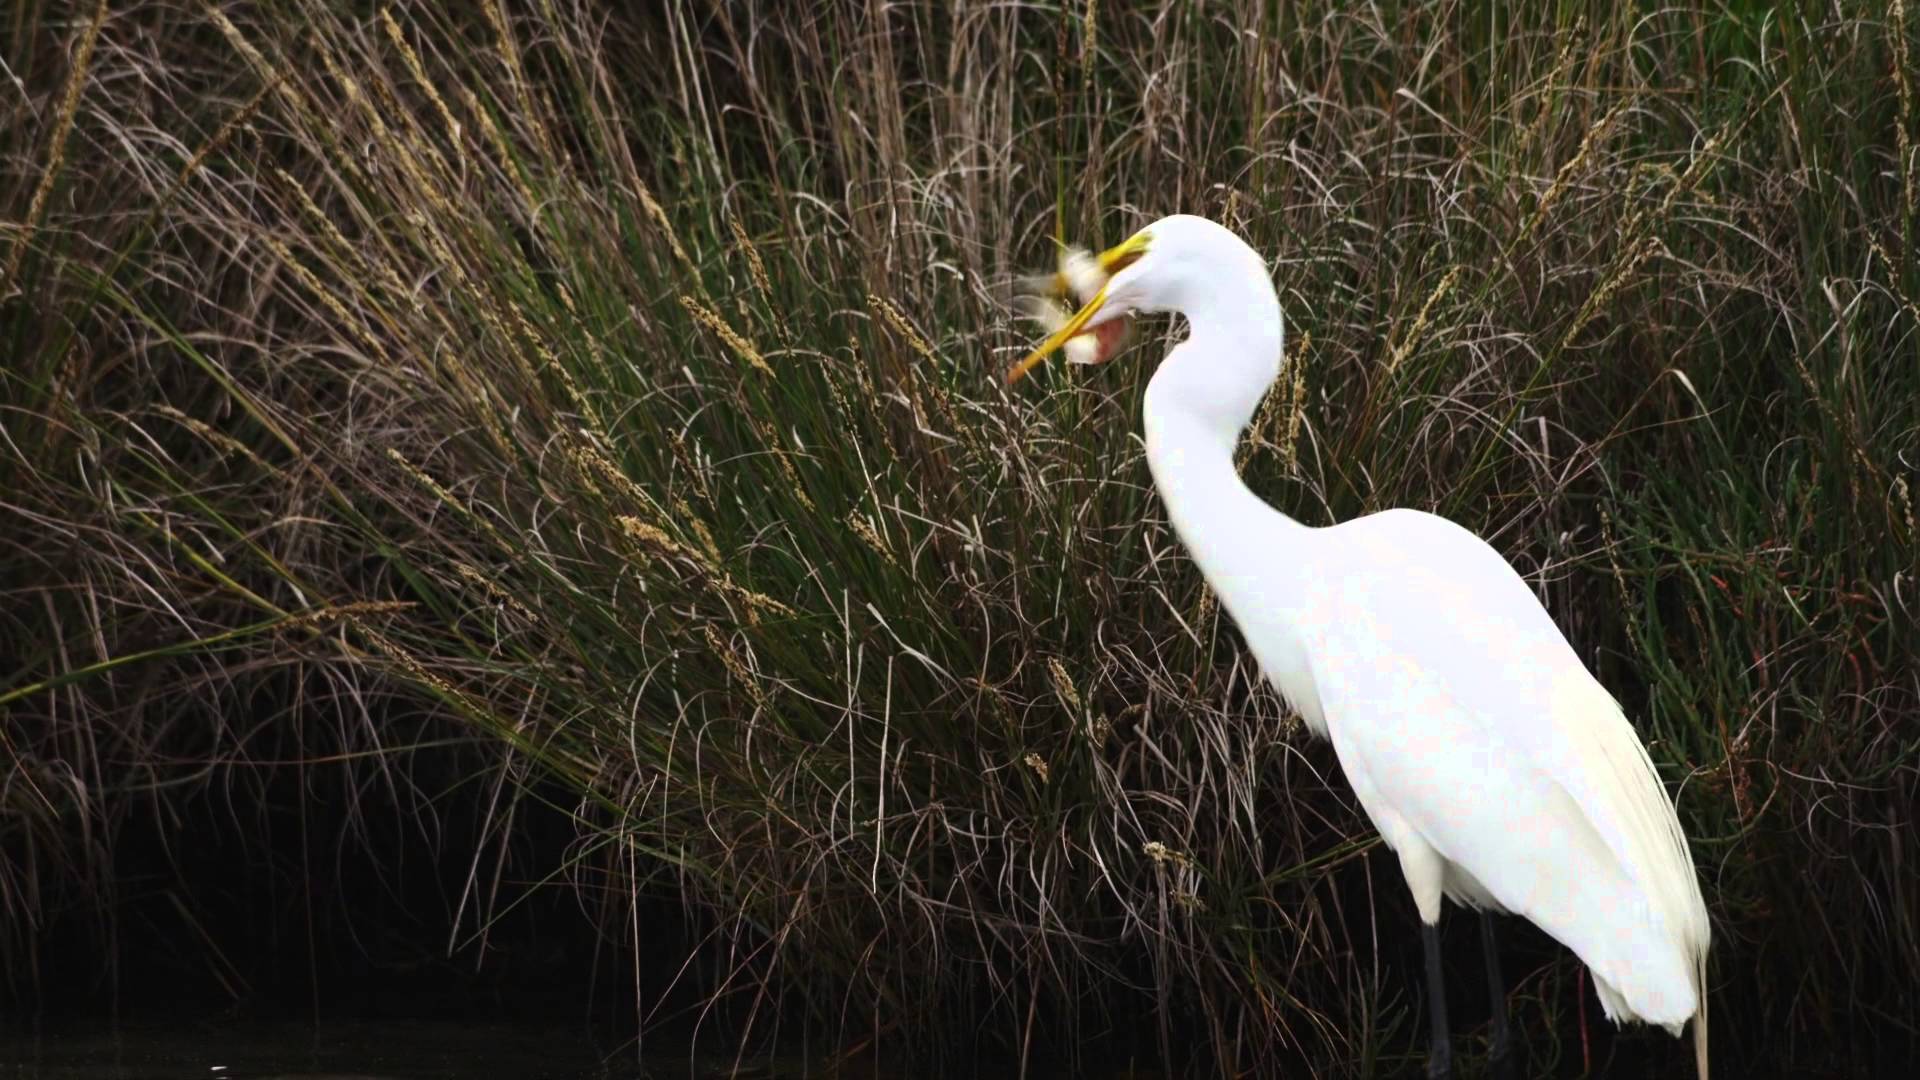 Great Egret Swallows a Large Fish - YouTube